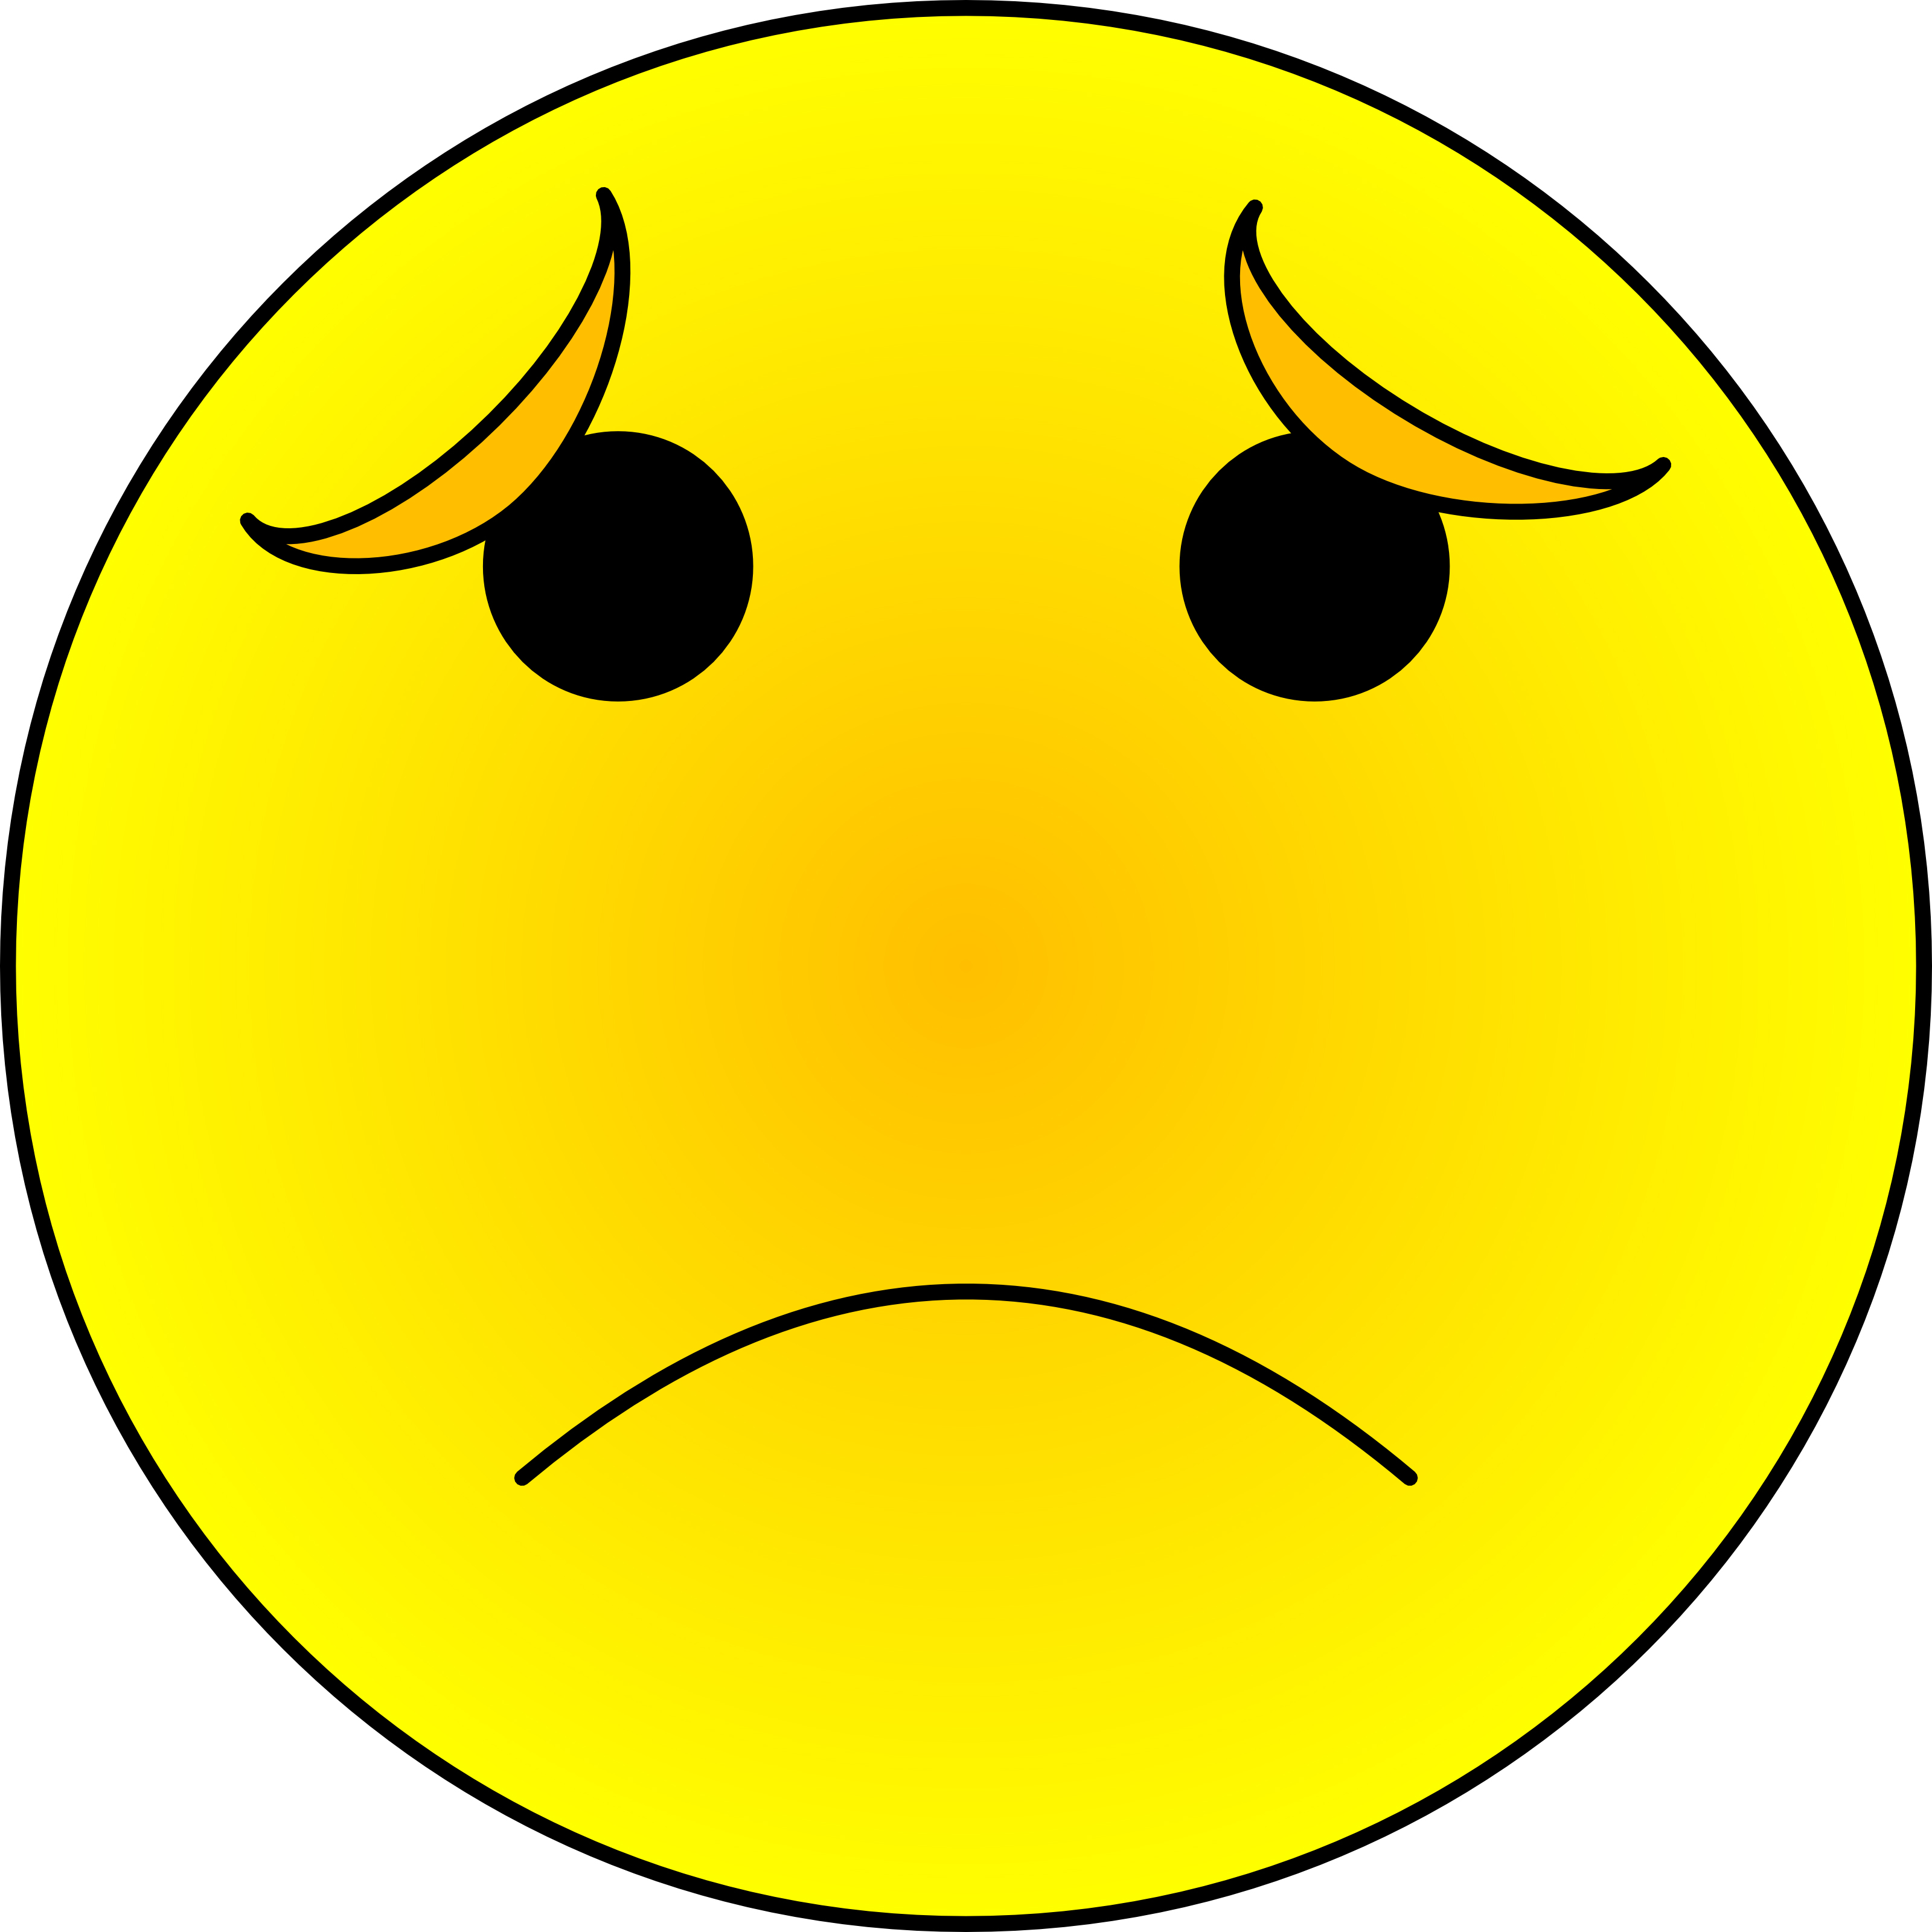 Sad Face Images Cartoon | Free download on ClipArtMag